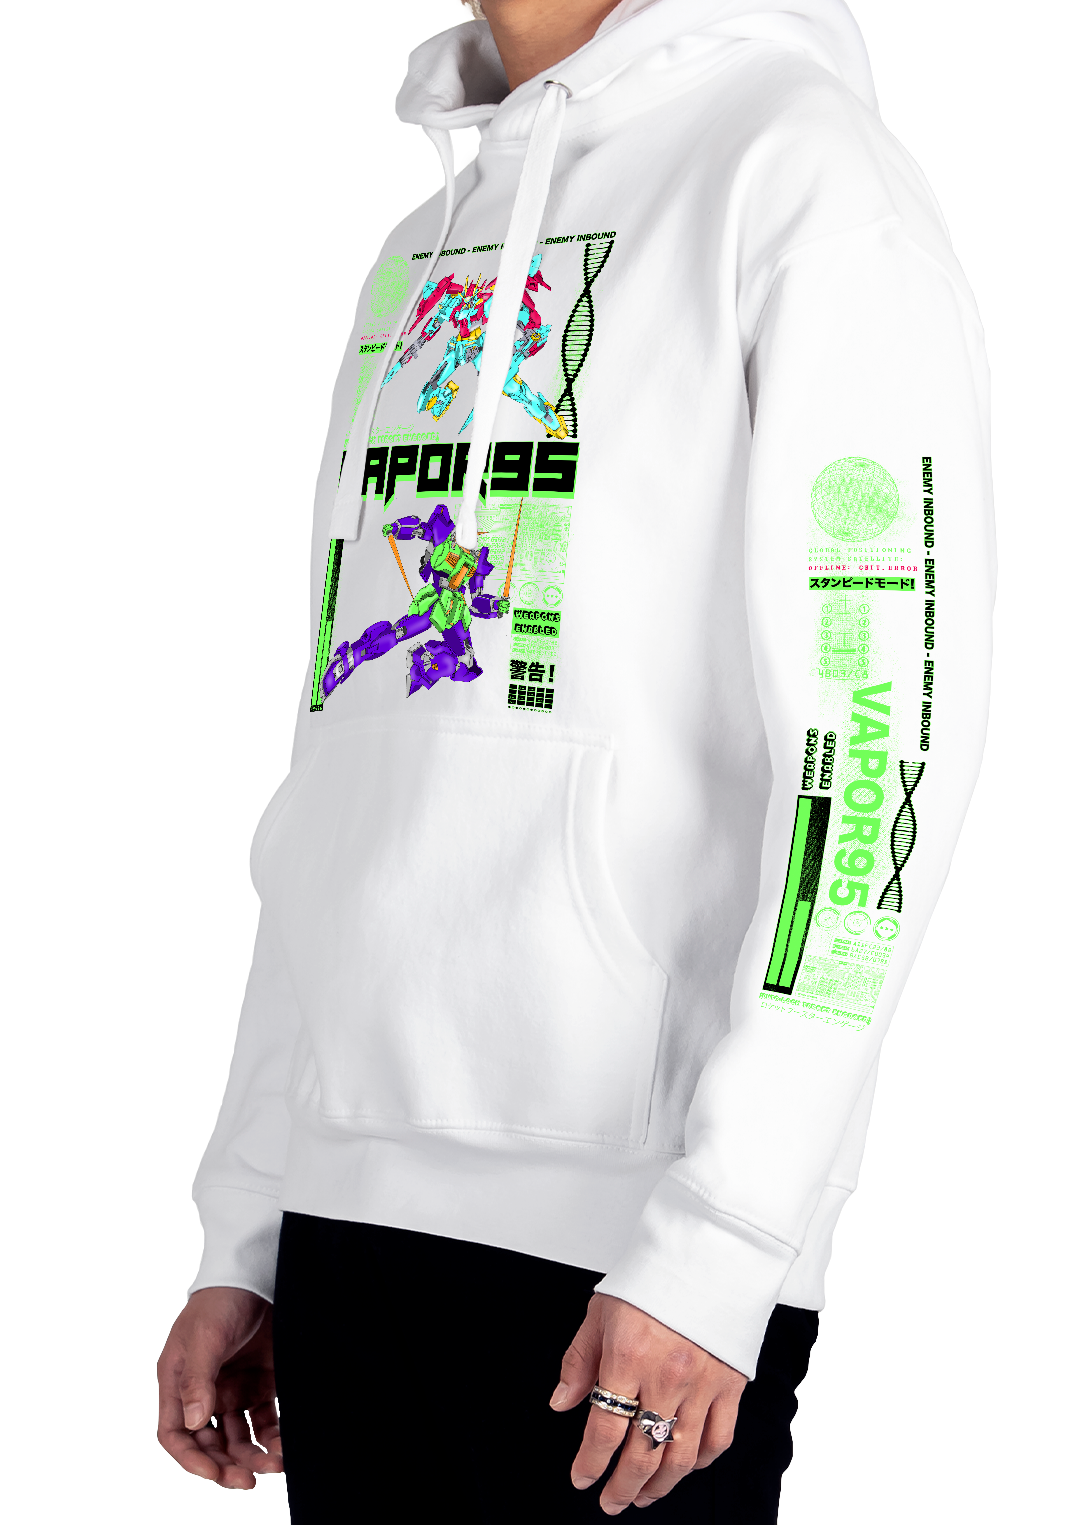 Experience the Vaporwave fashion with Vapor95's Graphic Hoodies | Mech ...